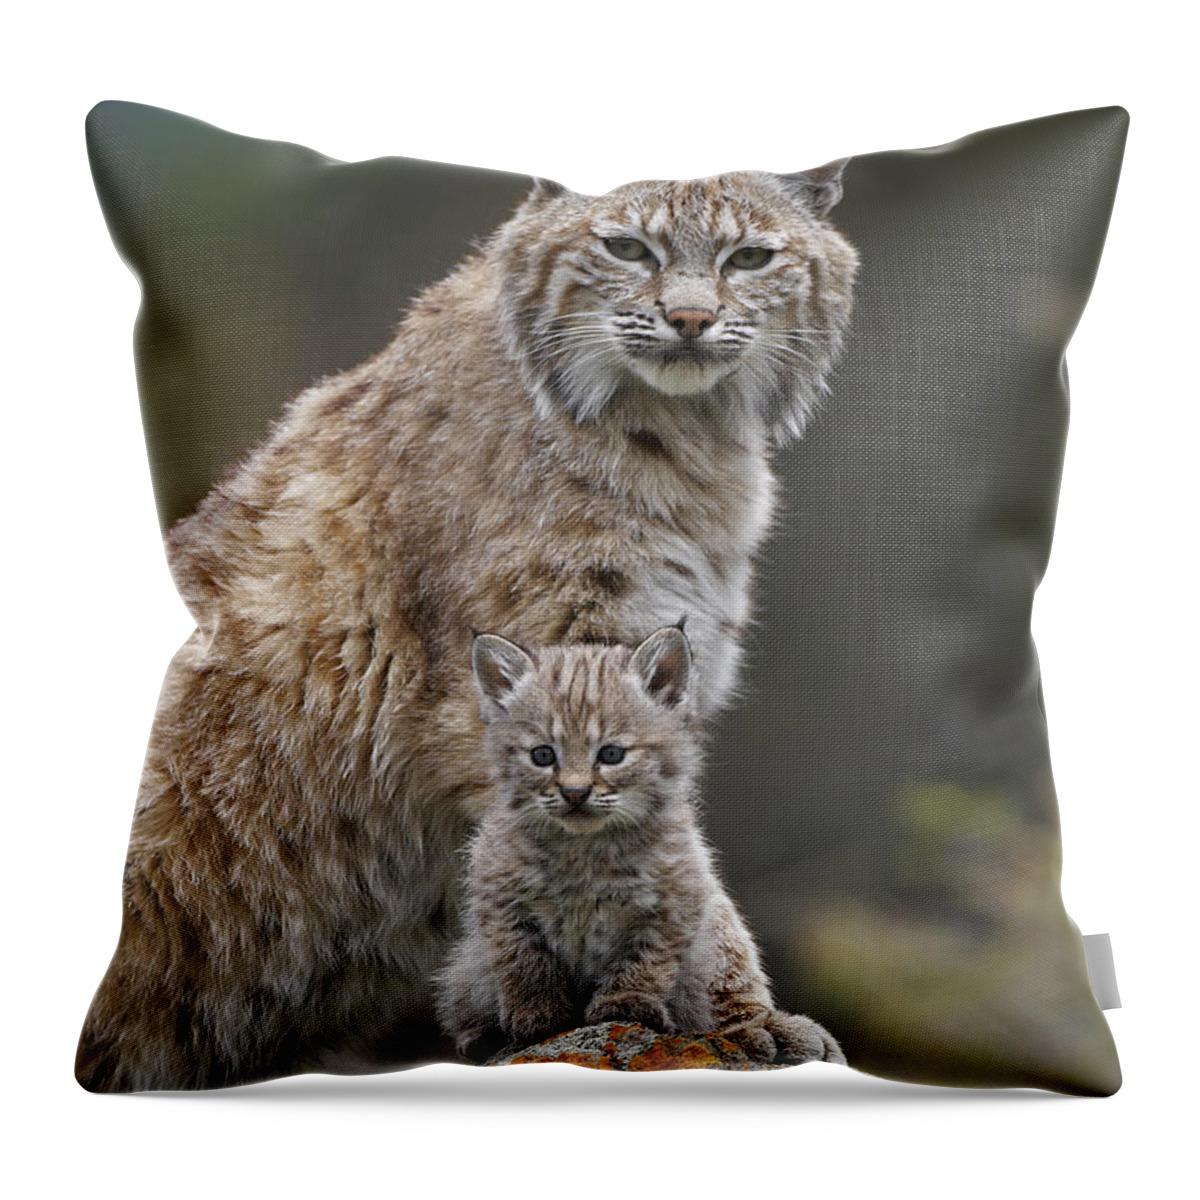 00177005 Throw Pillow featuring the photograph Bobcat Mother And Kitten North America by Tim Fitzharris